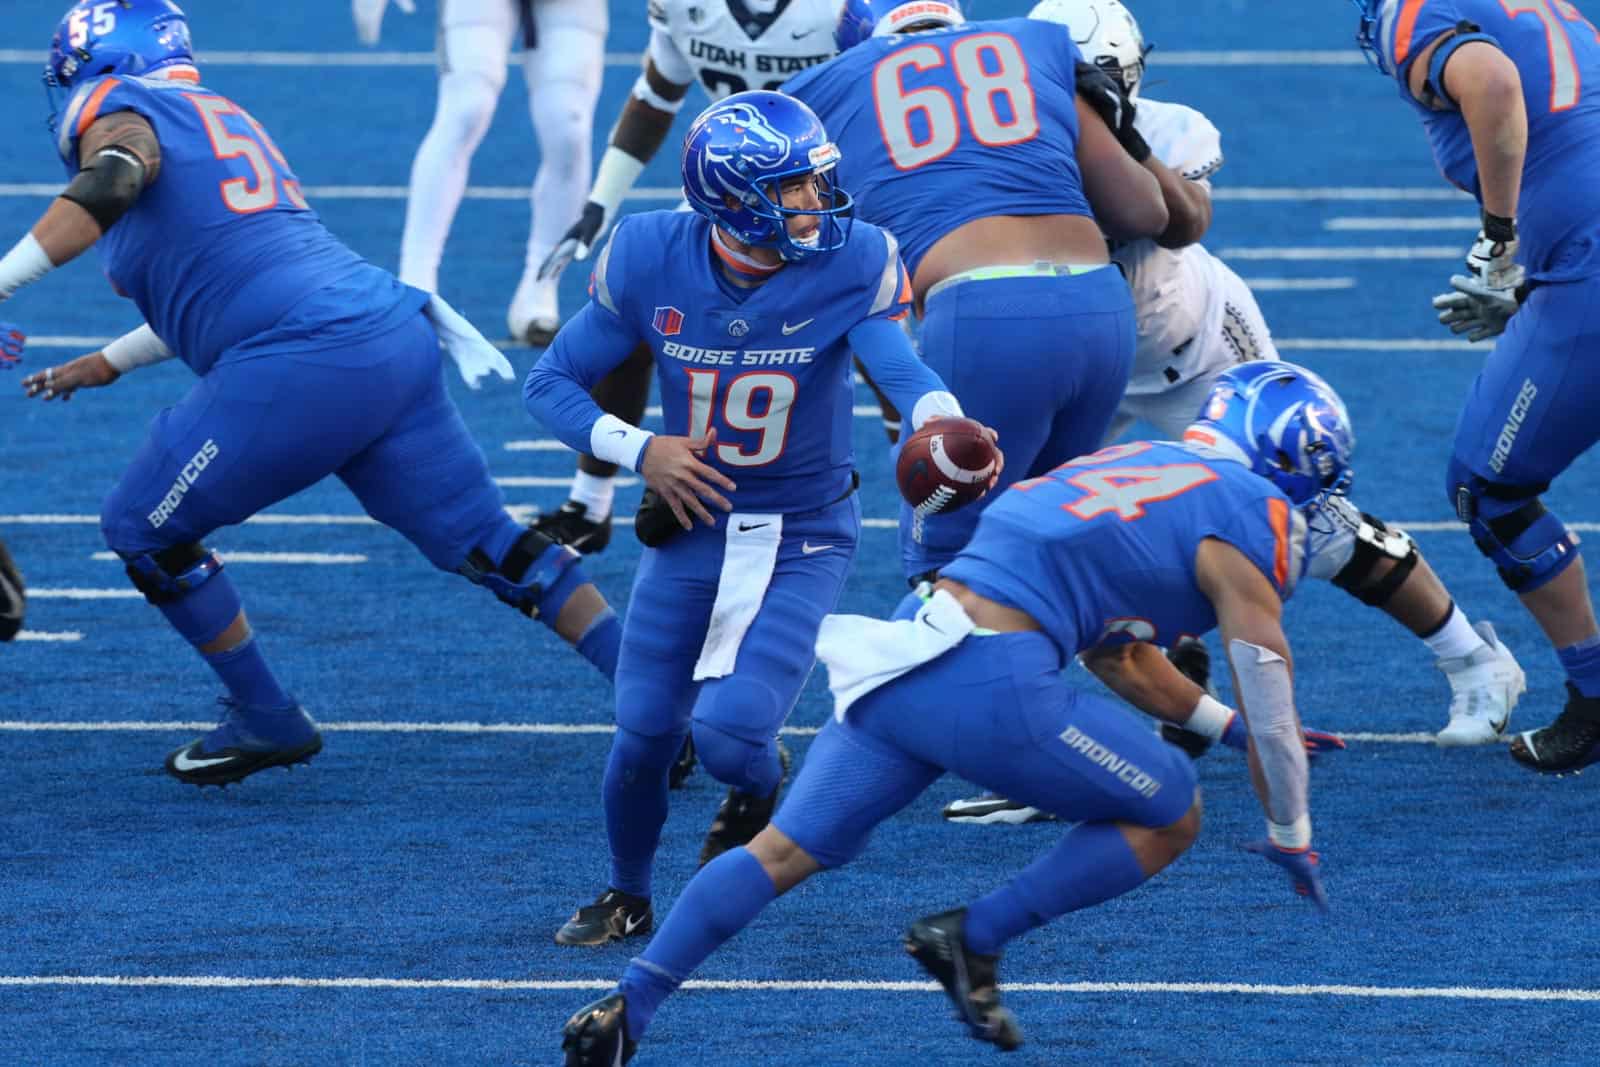 Boise state vs byu betting predictions cryptocurrency ransomware